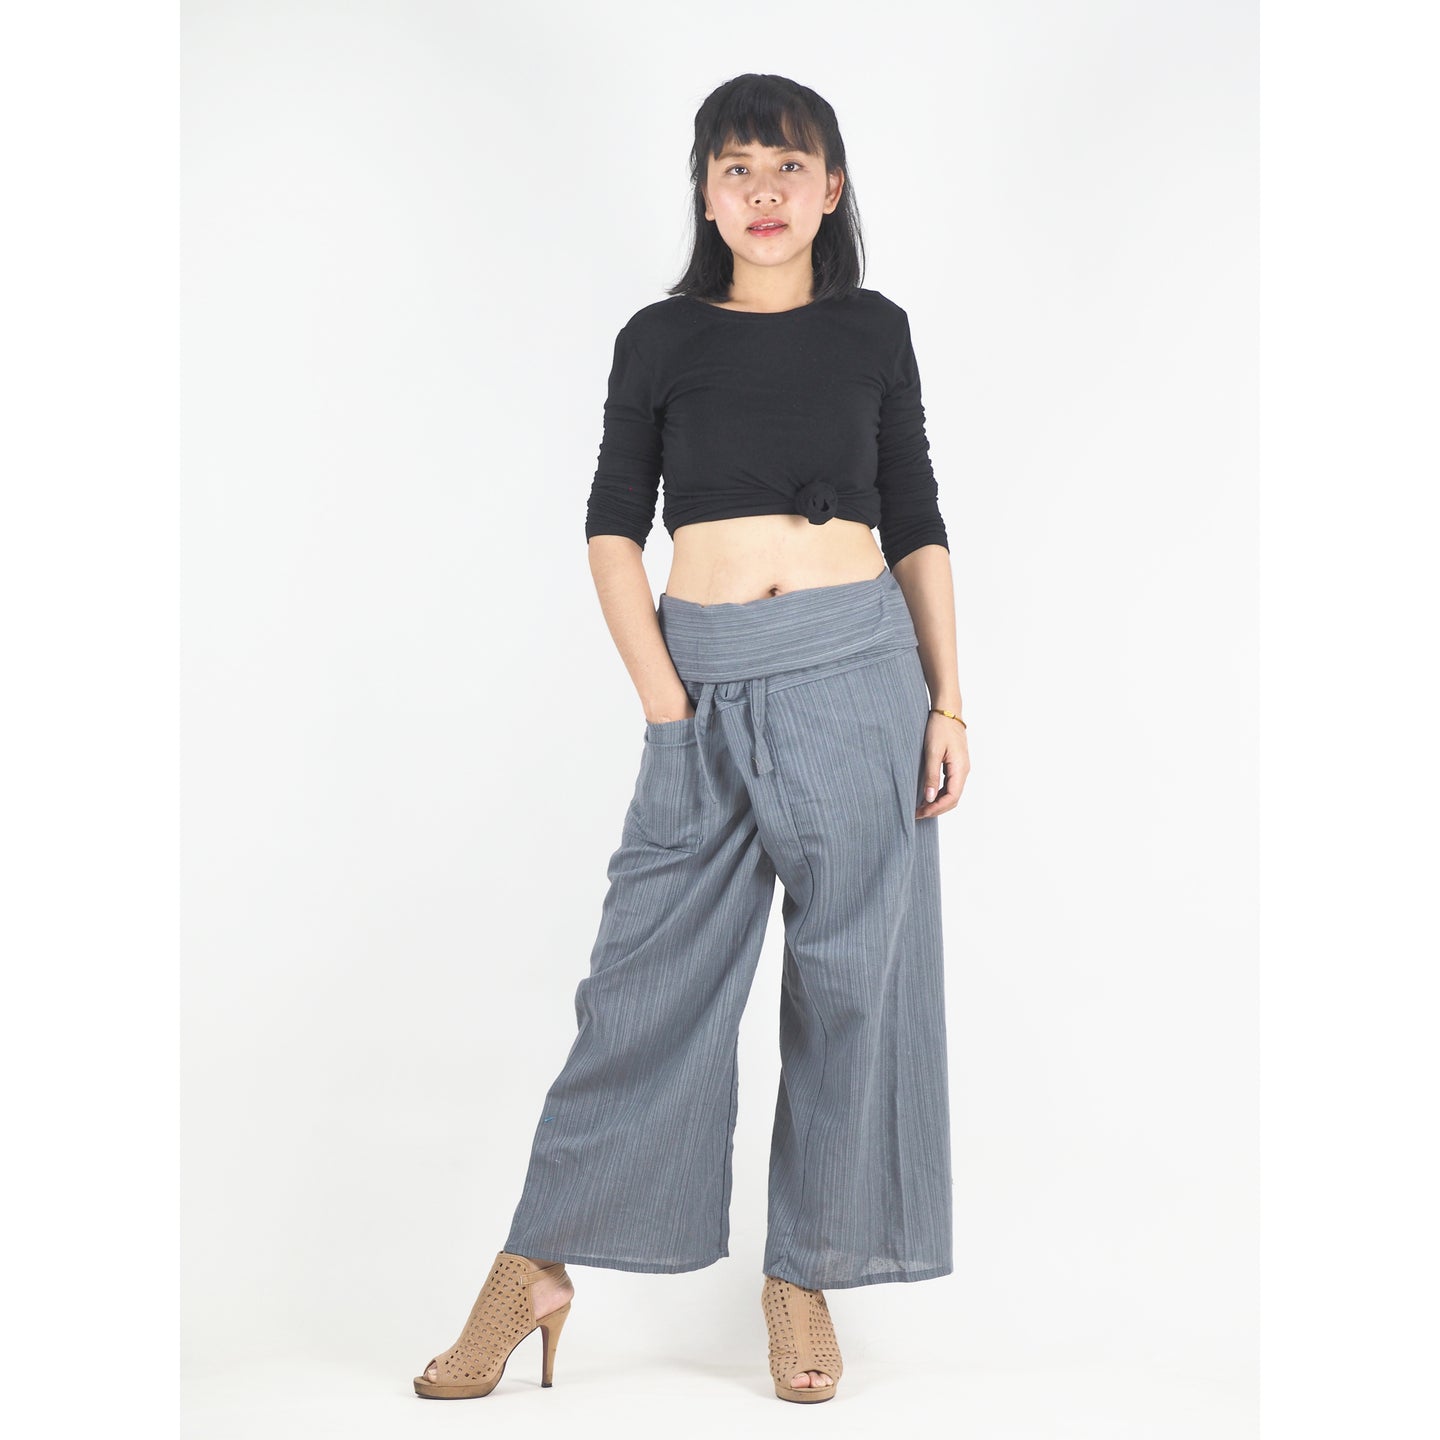 Solid color Unisex Fisherman Yoga Long Pants in Gray PP0007 010000 05